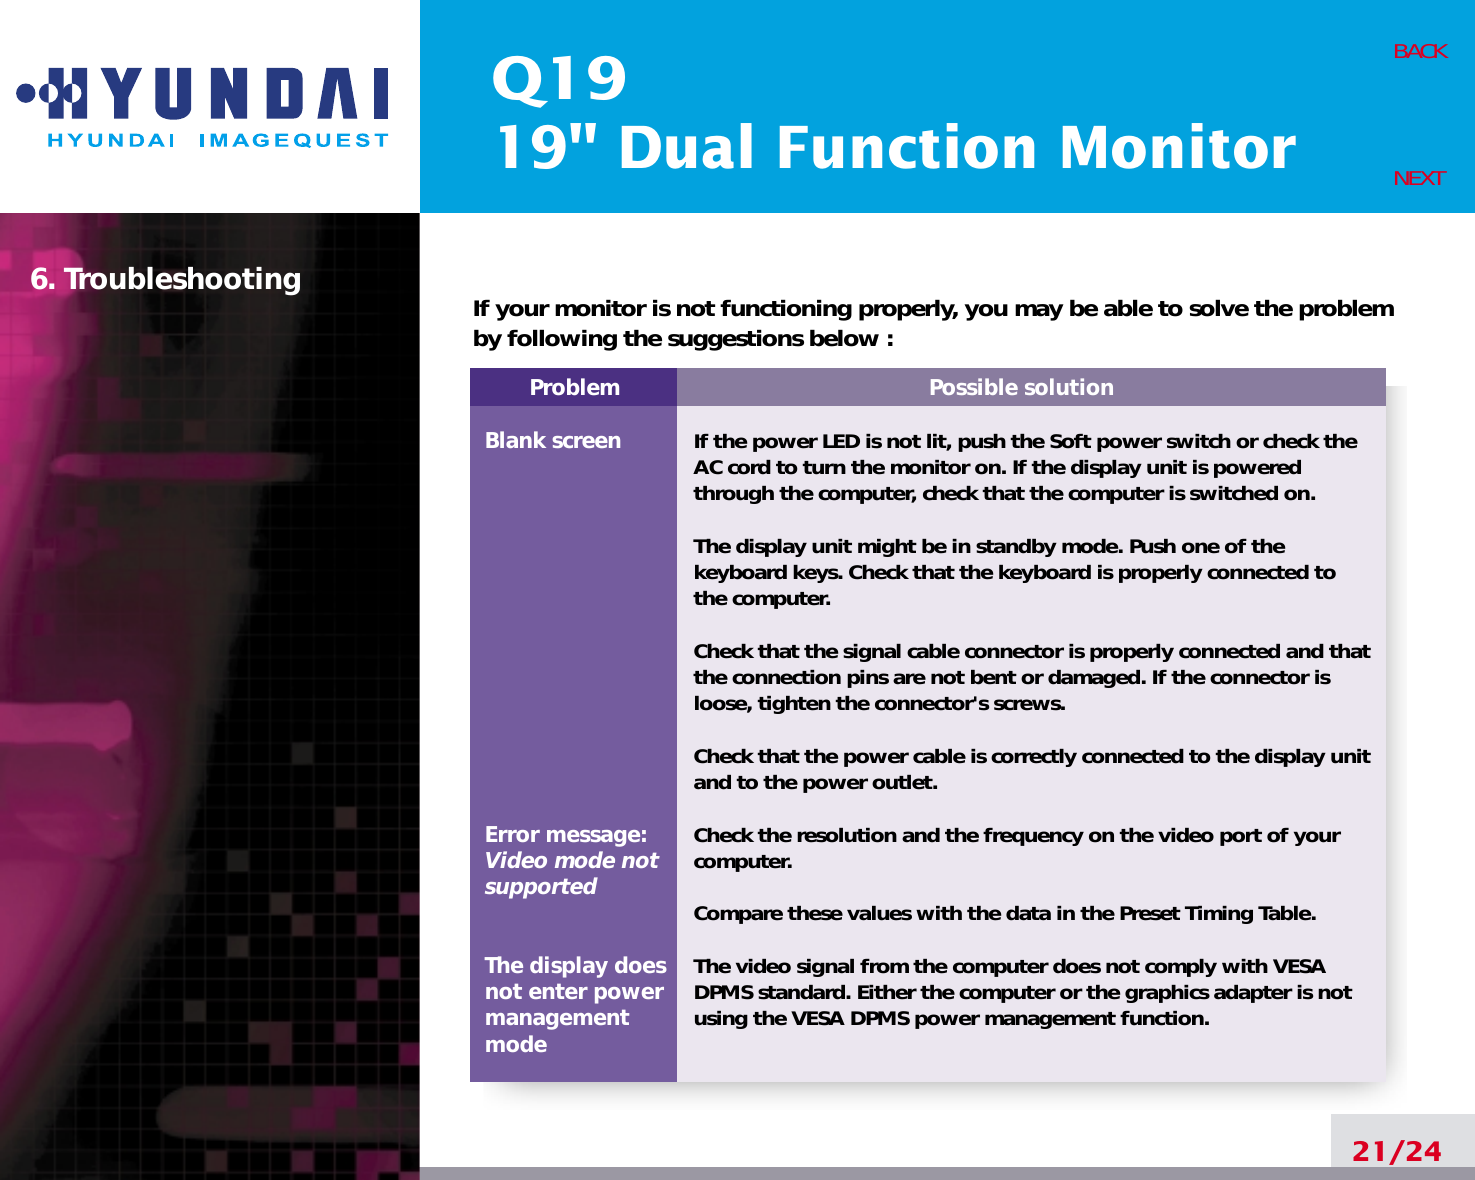 Q1919&quot; Dual Function Monitor6. Troubleshooting21/24BACKNEXTProblemBlank screenError message:Video mode notsupportedThe display does not enter power managementmodePossible solutionIf the power LED is not lit, push the Soft power switch or check theAC cord to turn the monitor on. If the display unit is poweredthrough the computer, check that the computer is switched on.The display unit might be in standby mode. Push one of thekeyboard keys. Check that the keyboard is properly connected tothe computer.Check that the signal cable connector is properly connected and thatthe connection pins are not bent or damaged. If the connector isloose, tighten the connector&apos;s screws.Check that the power cable is correctly connected to the display unitand to the power outlet. Check the resolution and the frequency on the video port of yourcomputer.Compare these values with the data in the Preset Timing Table.The video signal from the computer does not comply with VESADPMS standard. Either the computer or the graphics adapter is notusing the VESA DPMS power management function.If your monitor is not functioning properly, you may be able to solve the problemby following the suggestions below :